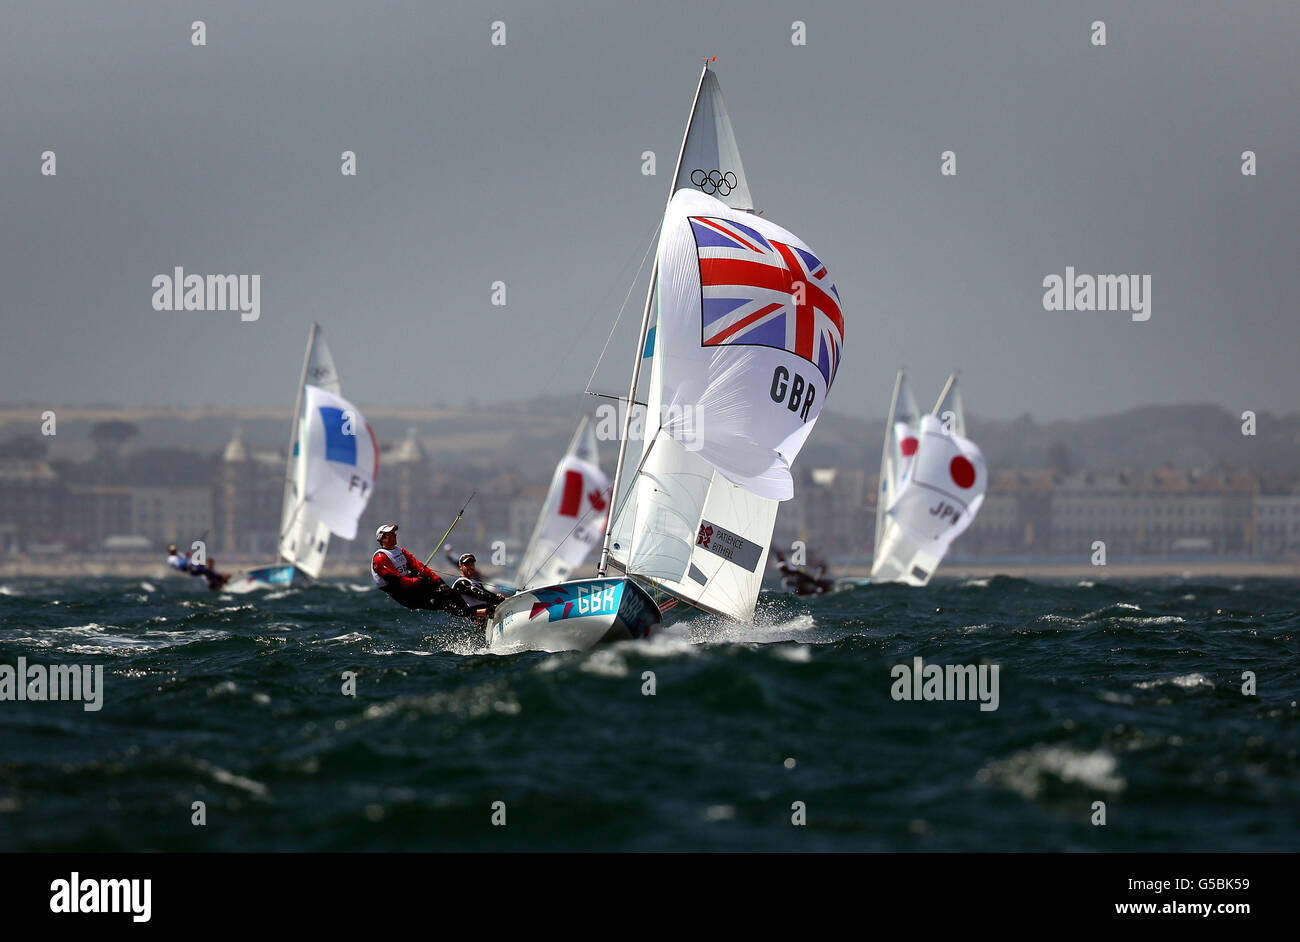 Great Britain's 470 sailors Luke Patience and Stuart Bithell who lead the fleet after the first two races of theri Olympic competition off Weymouth today. Stock Photo